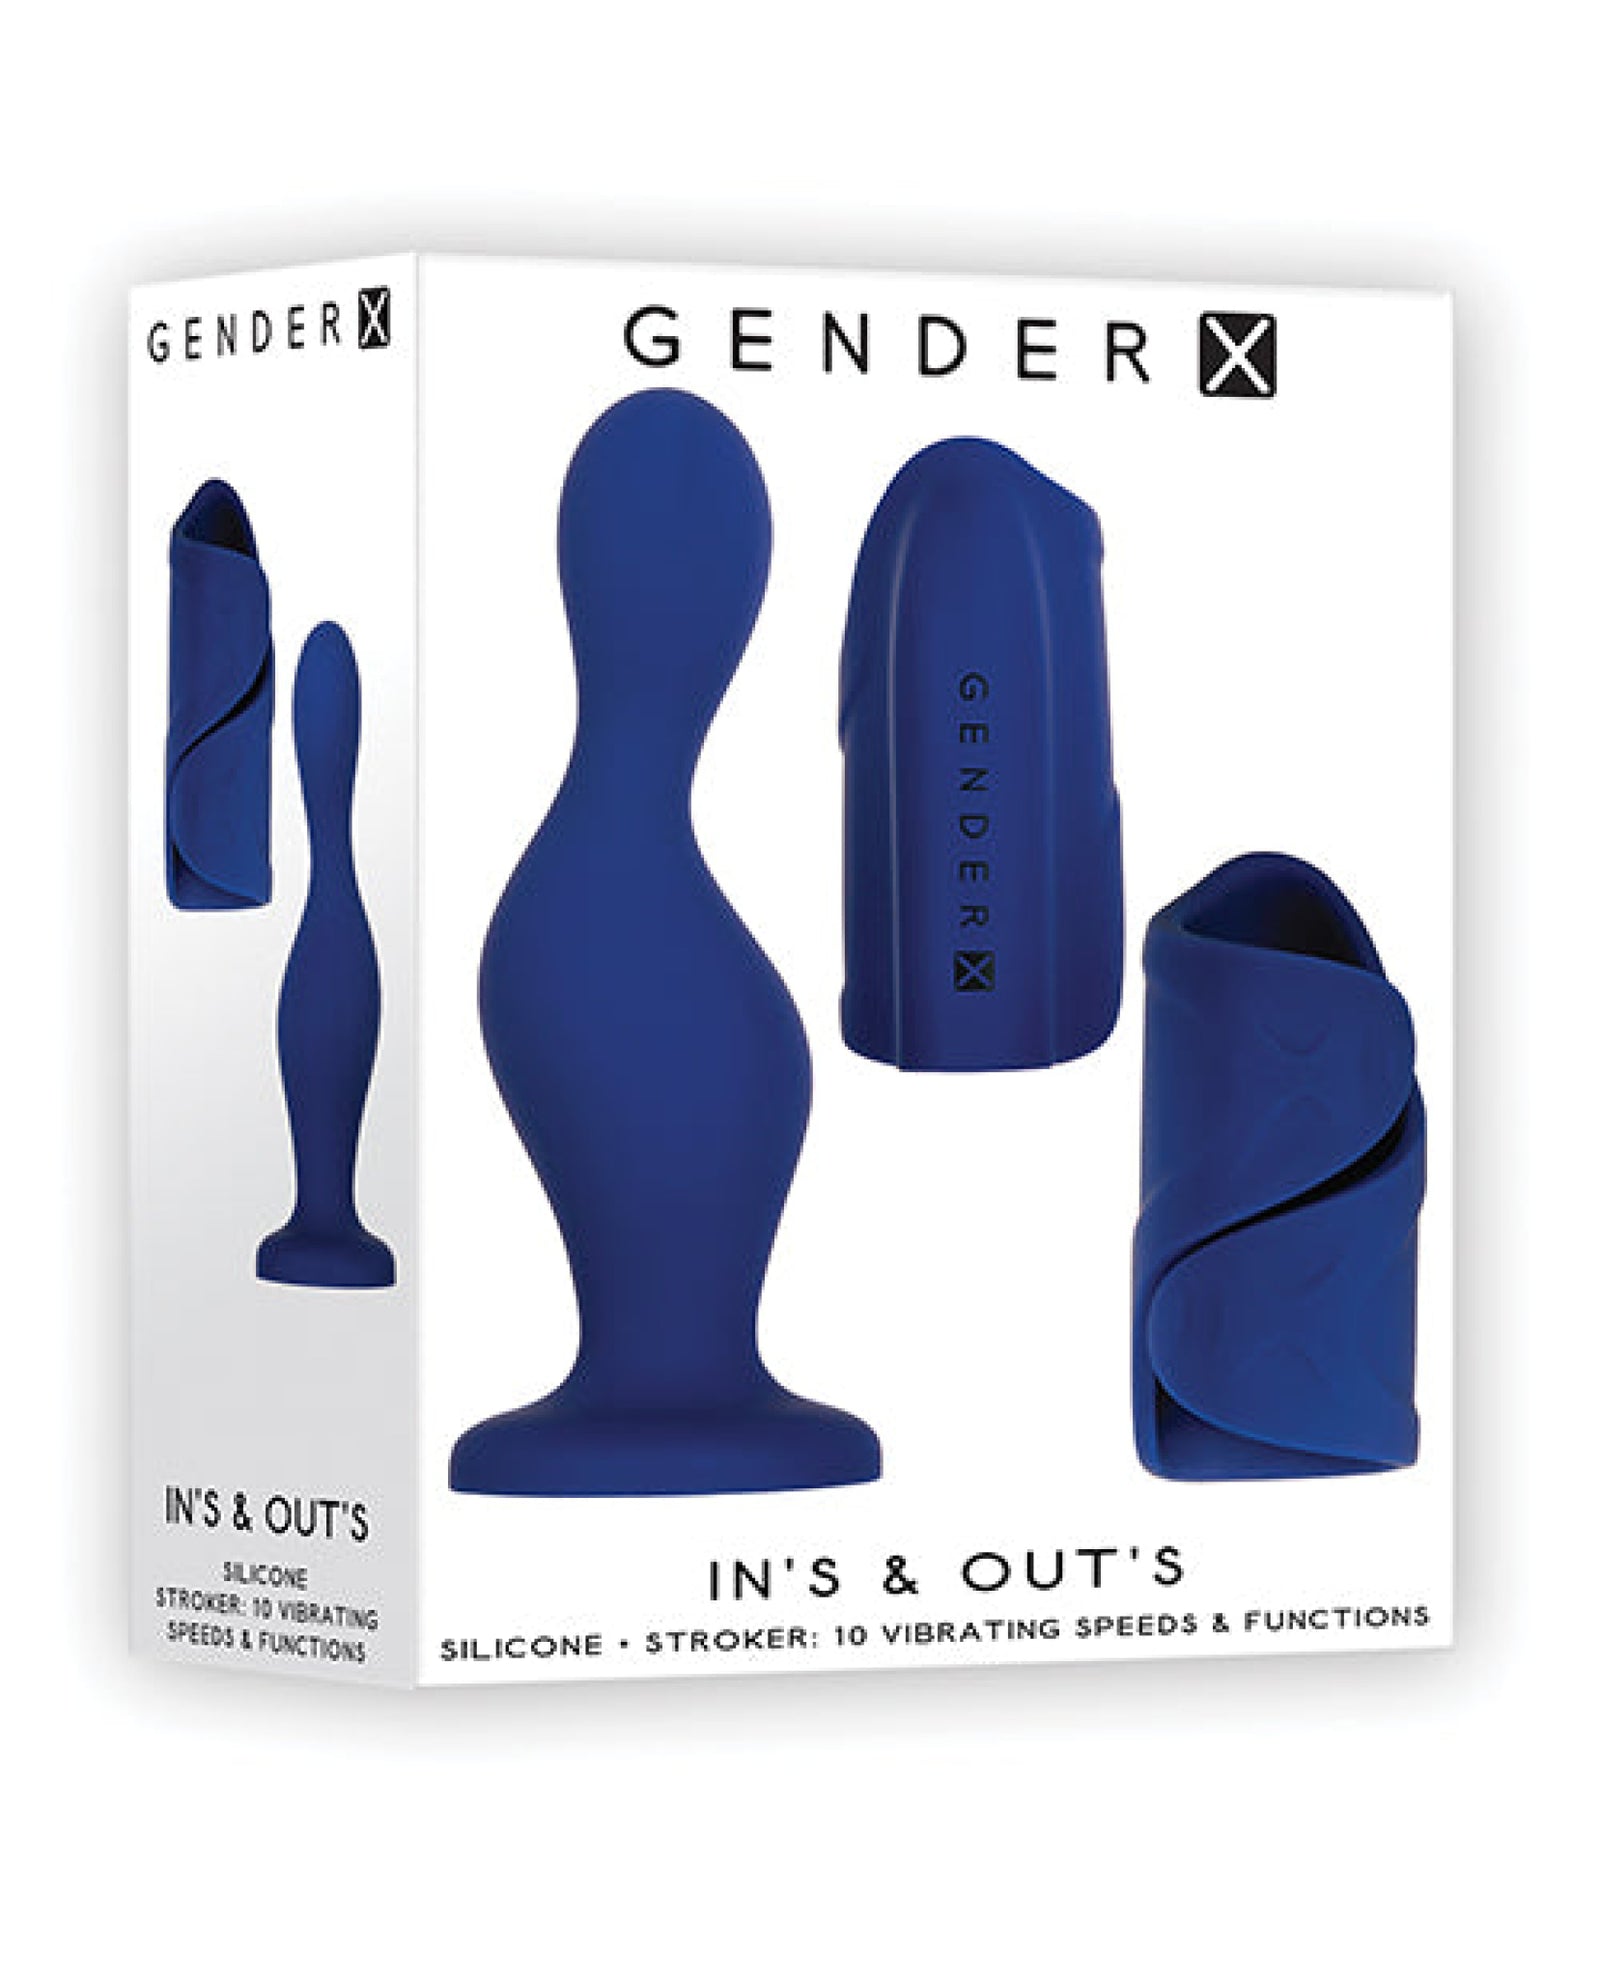 Gender X In's & Out's - Blue Gender X